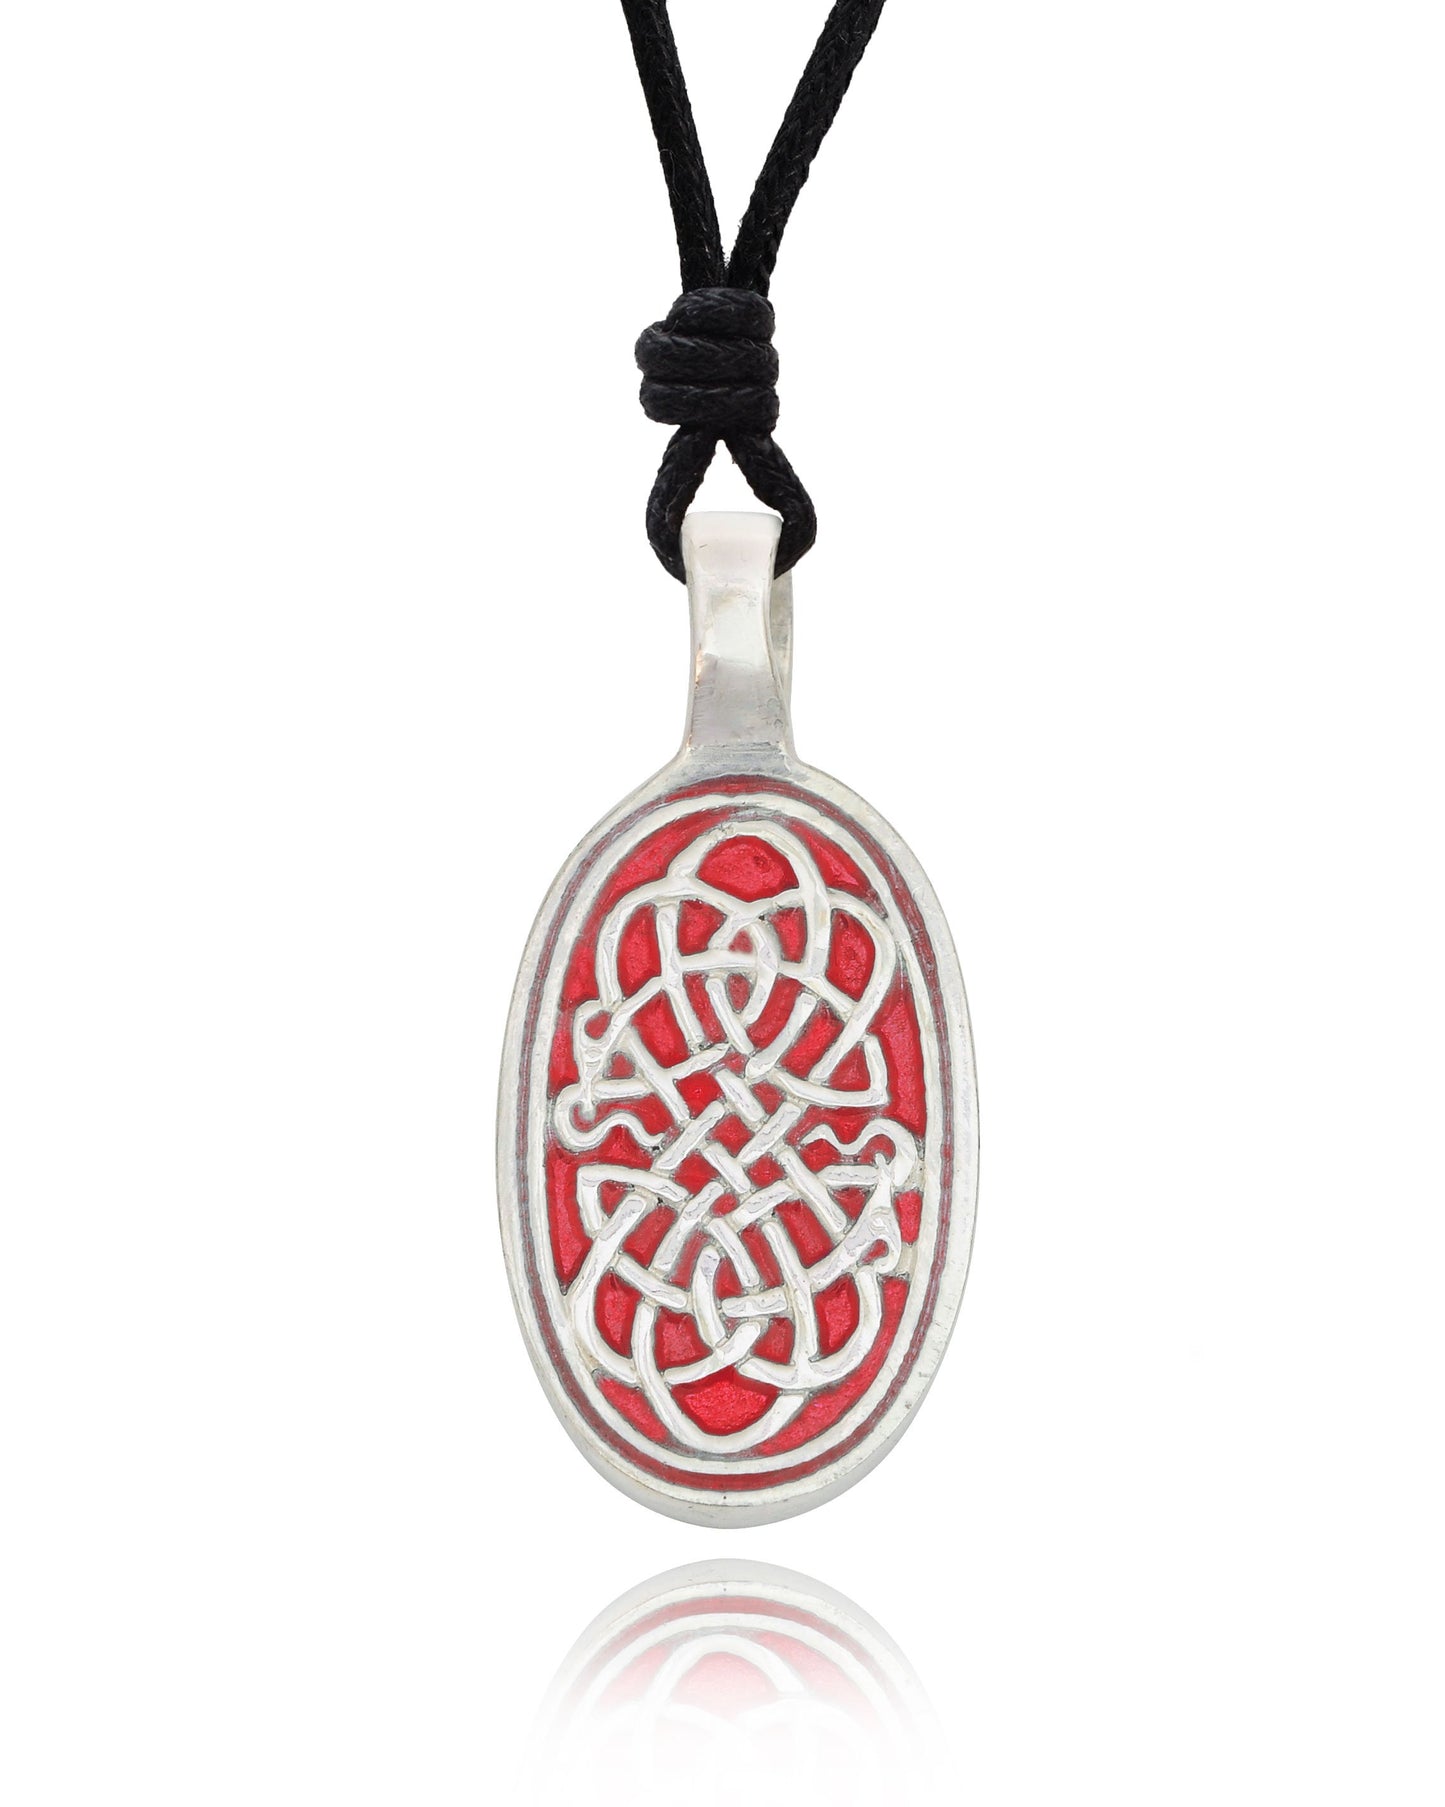 New Celtic Design Silver Pewter Charm Necklace Pendant Jewelry